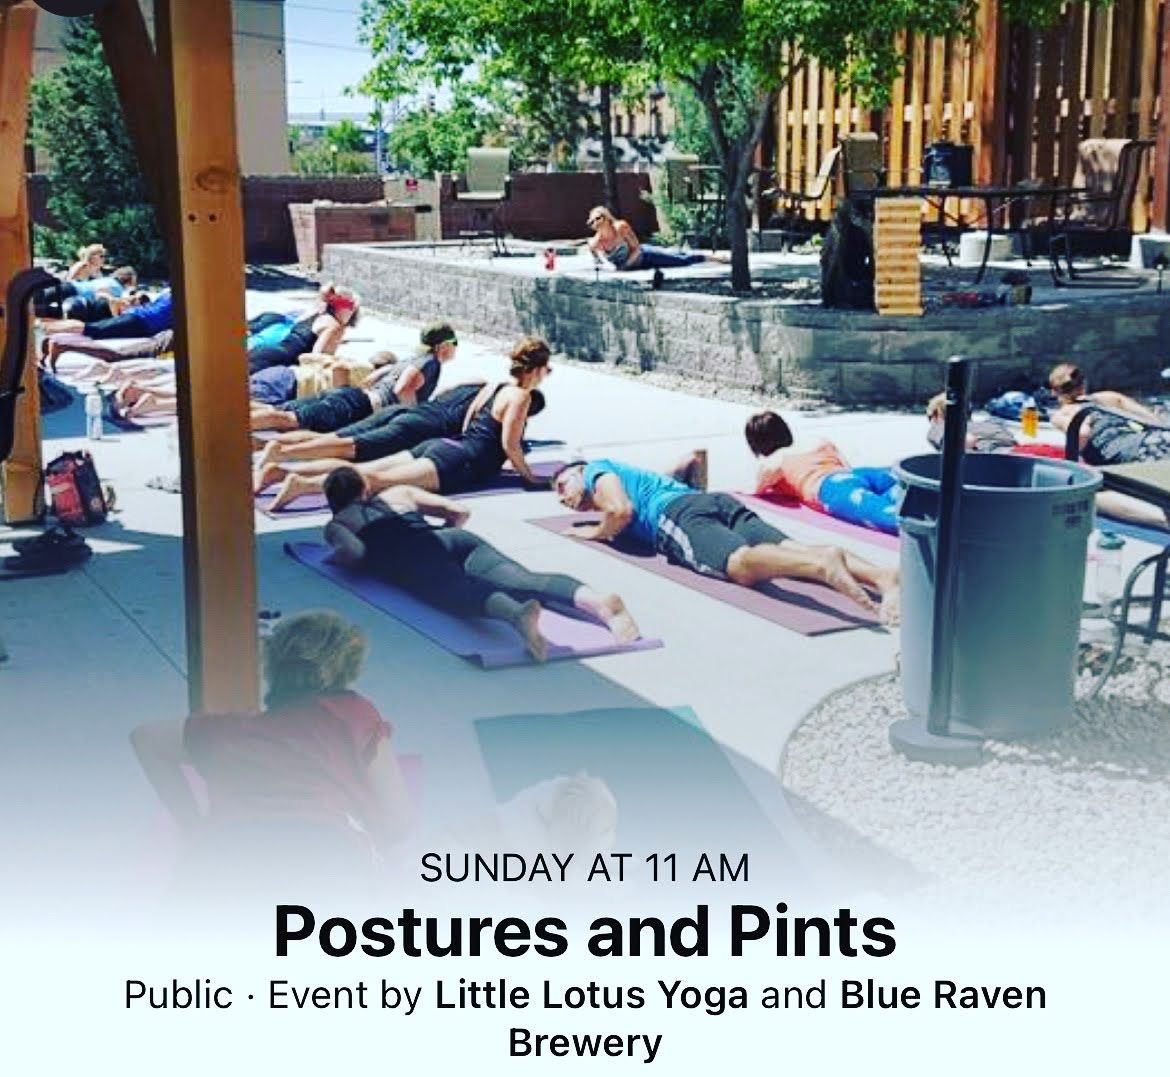 Postures and Pints on the Patio